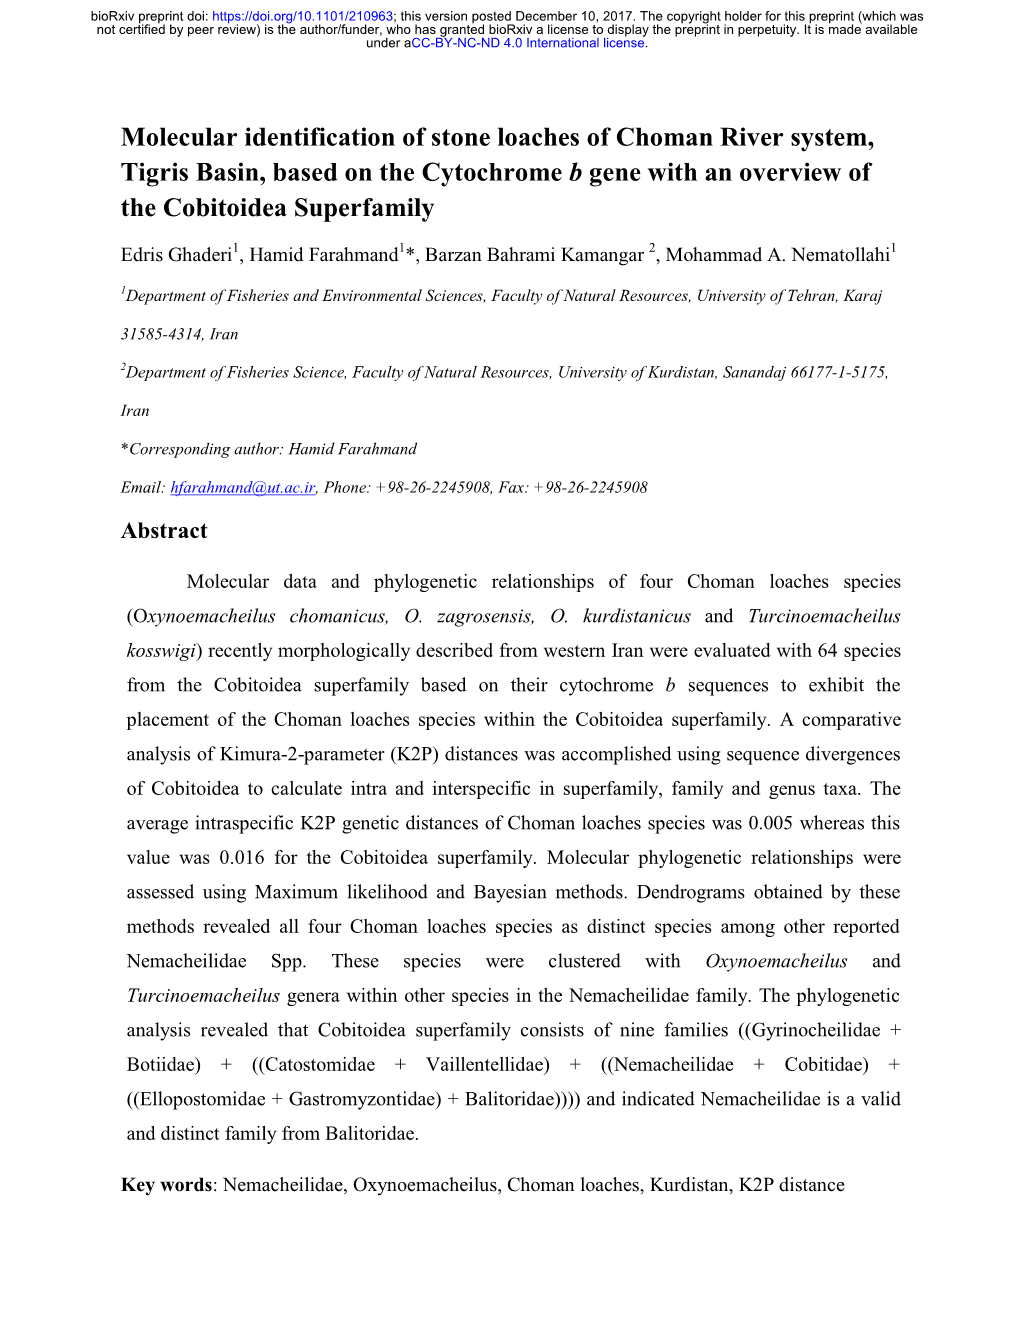 Molecular Identification of Stone Loaches of Choman River System, Tigris Basin, Based on the Cytochrome B Gene with an Overview of the Cobitoidea Superfamily